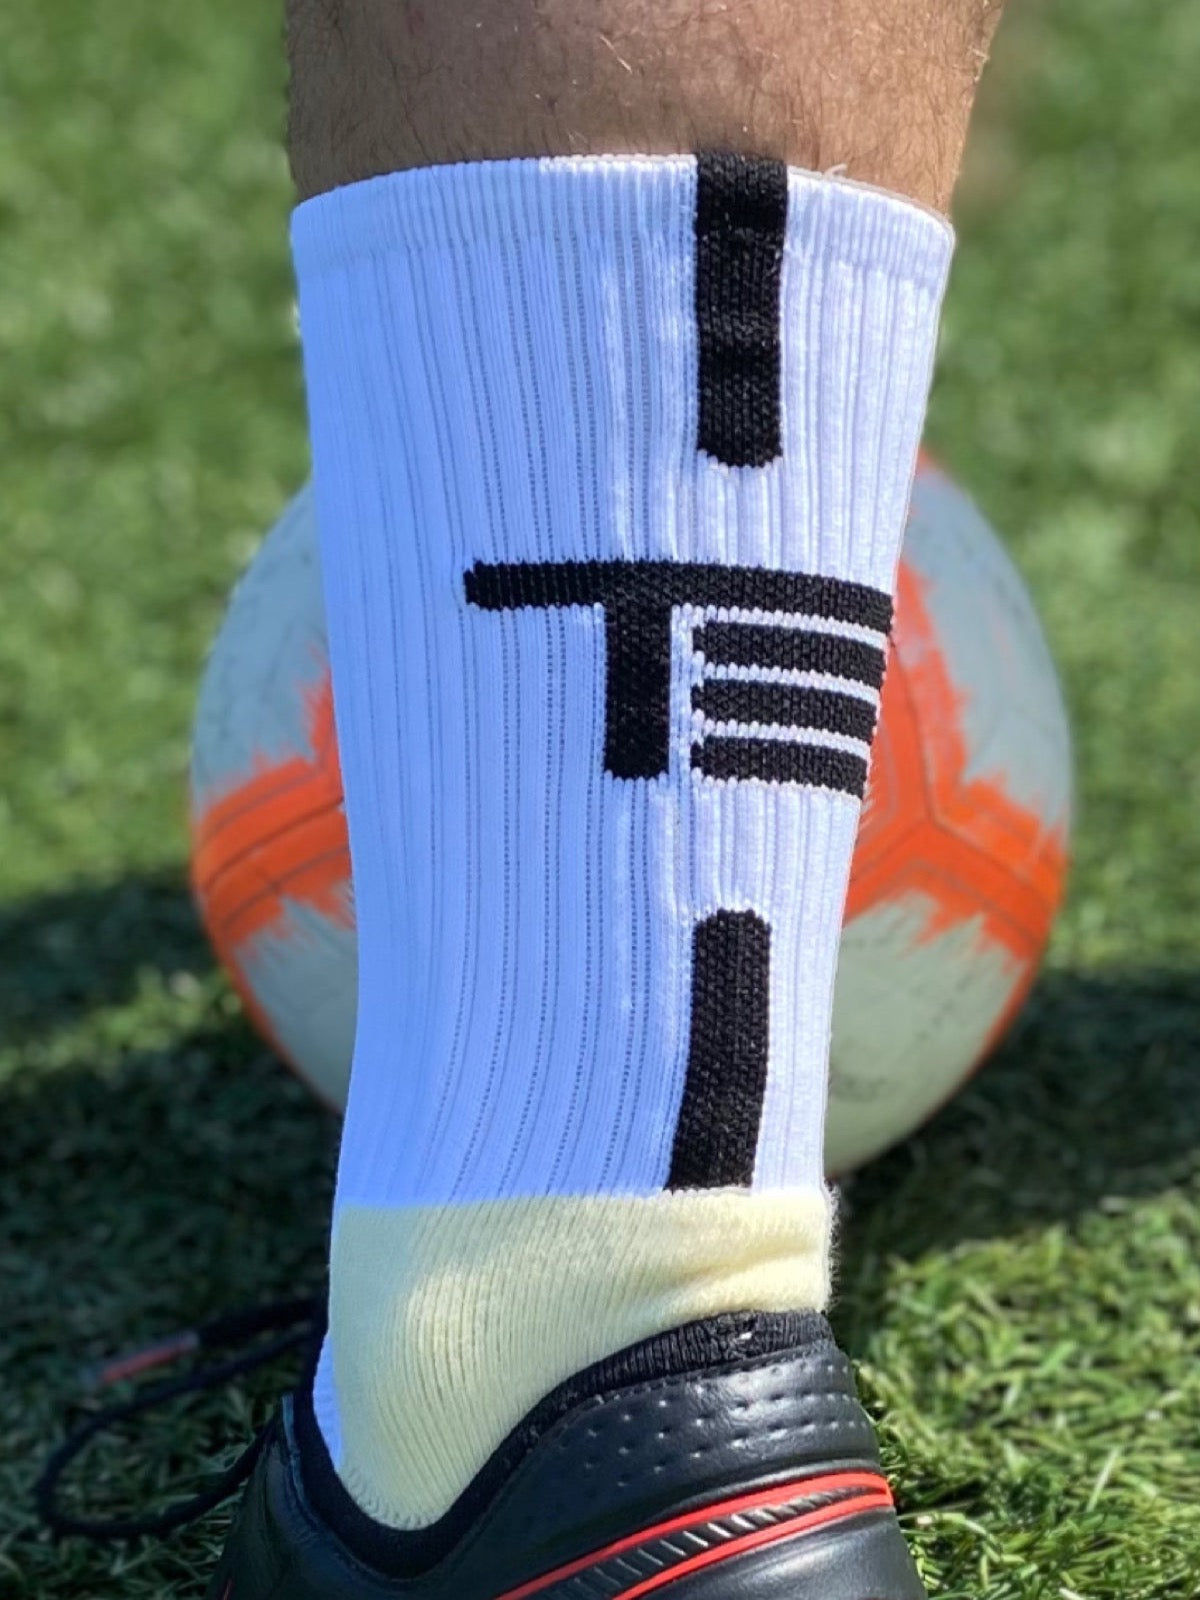 A high performance grip sock designed and worn by professional goalkeepers and soccer players